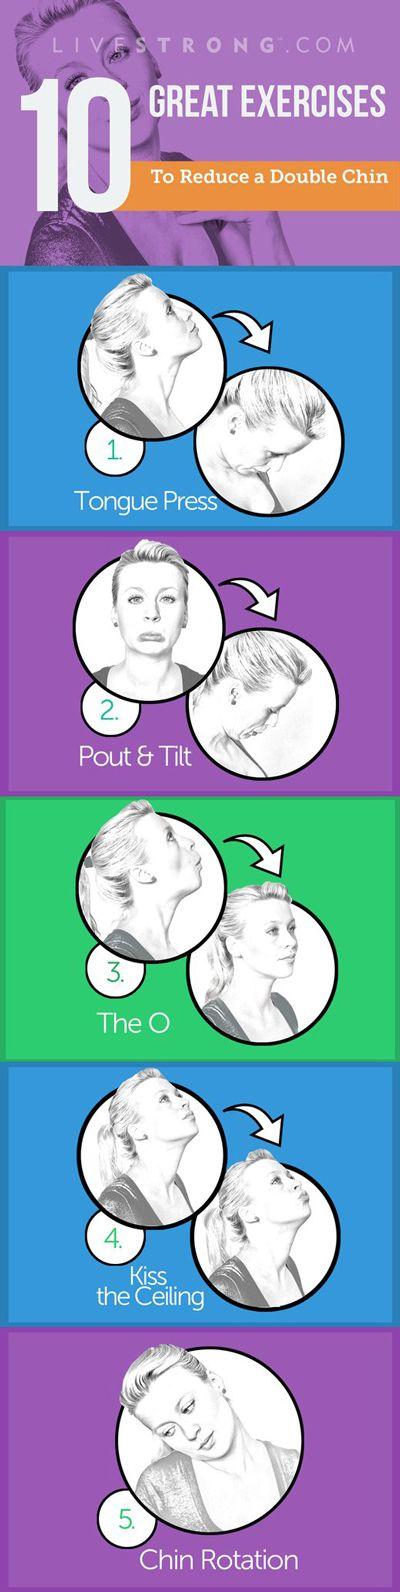 Hochzeit - The 10 Best Exercises To Reduce A Double Chin